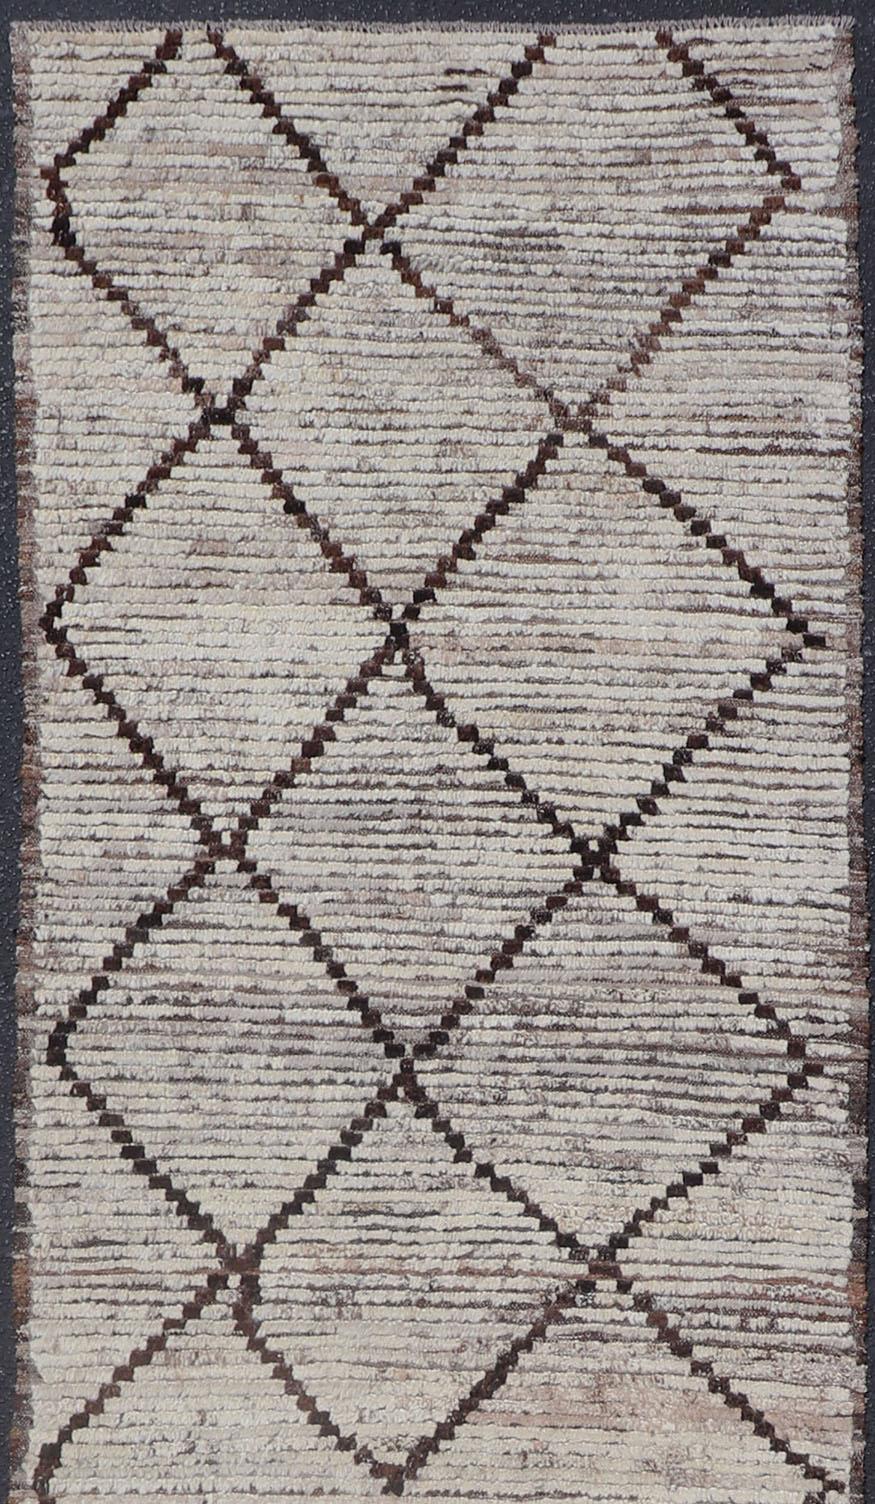 Variegated white and off white background along with brown diamond shaped lines creates tribal design, modern design runner, Keivan Woven Arts/rug AFG-36130, country of origin / type: Afghanistan / Modern, condition: new. Moroccan Runner , Moroccan